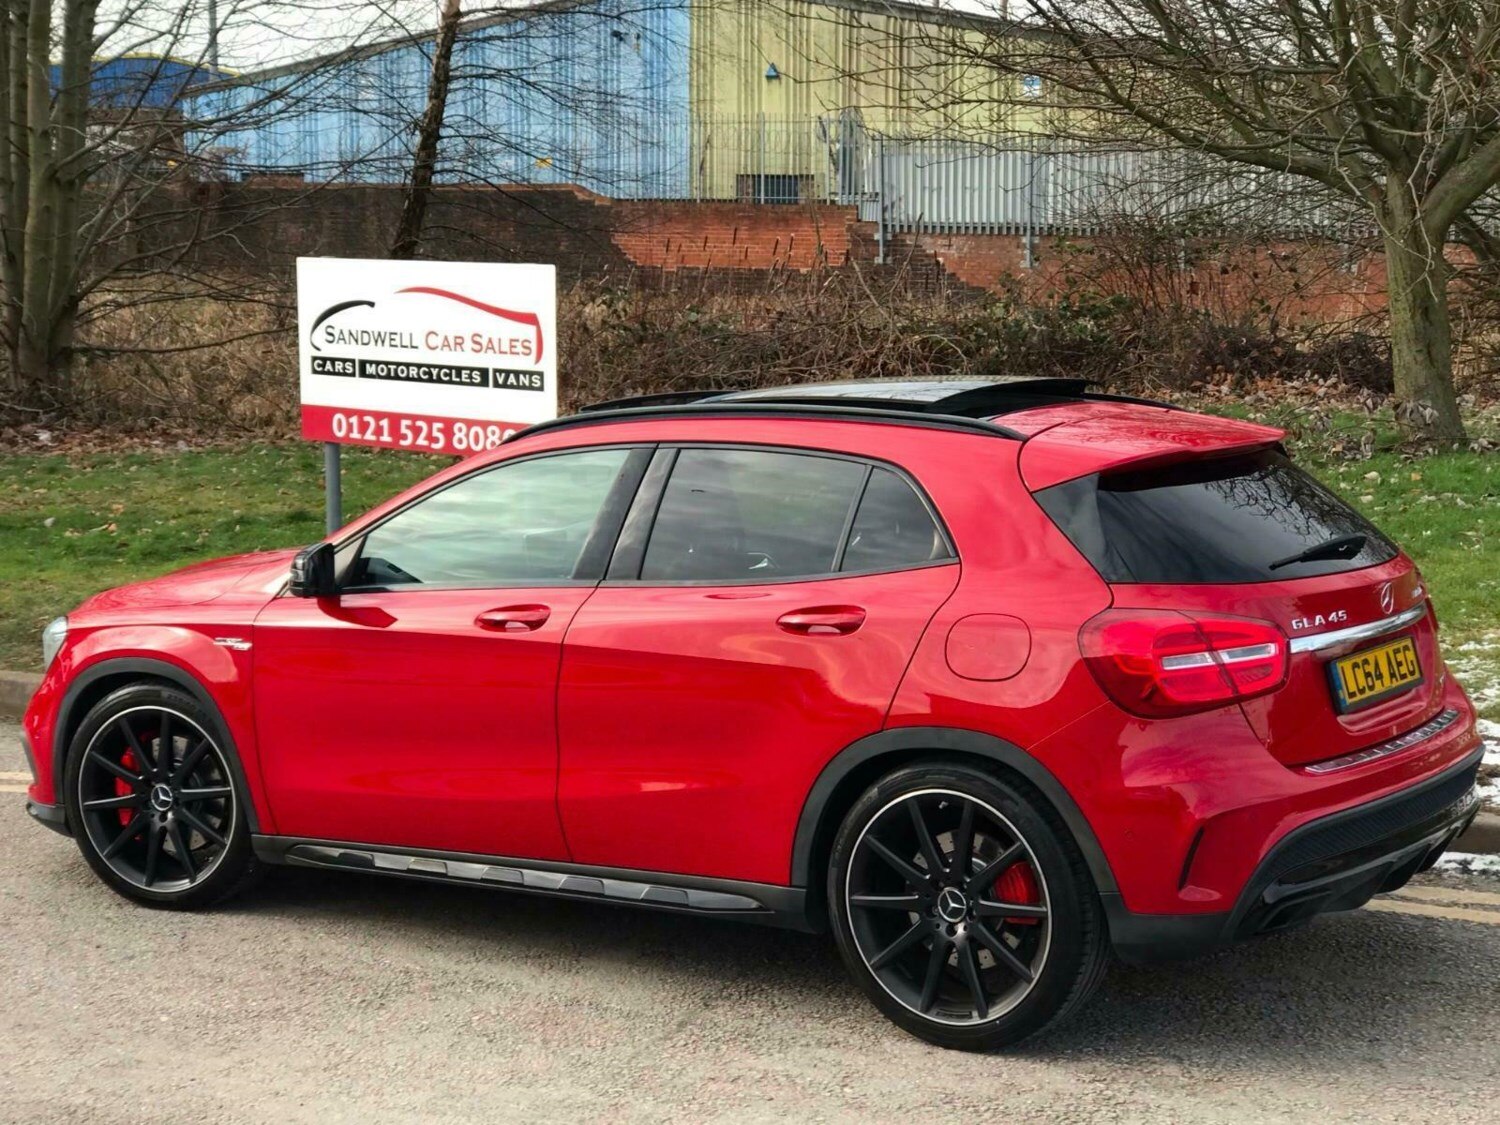 Used Mercedes Benz Gla Class Amg For Sale Rac Cars